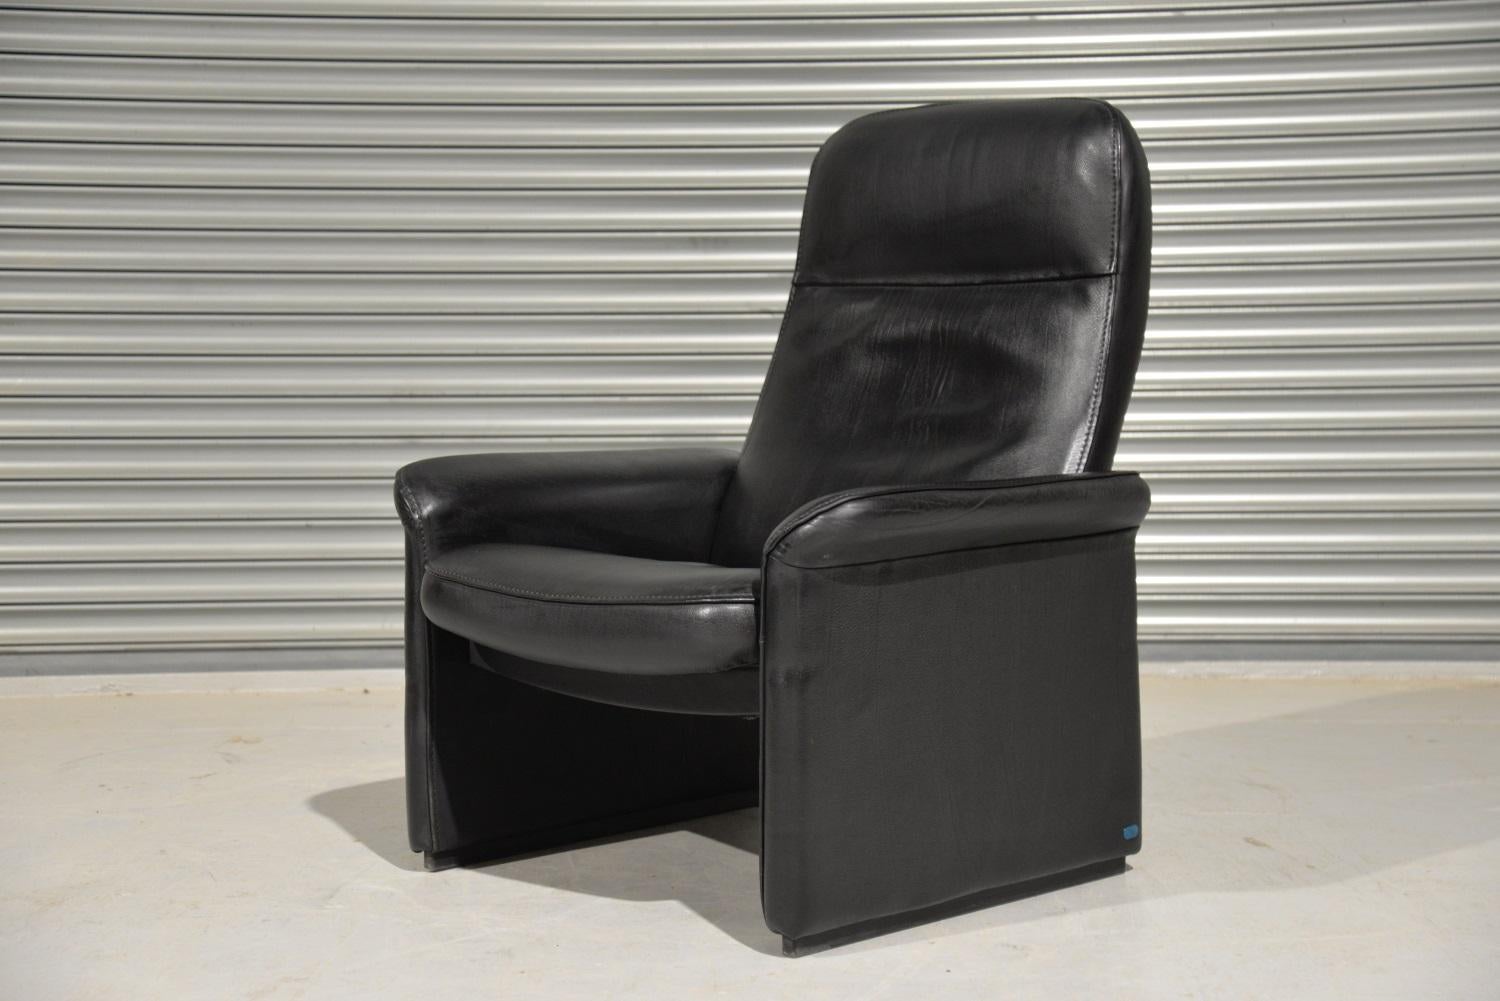 Discounted airfreight for our US and International customers (from 2 weeks door to door) 

We are delighted to bring to you a DS 50 model reclining leather lounge armchair built to incredibly high standards by De Sede craftsman in Switzerland. This